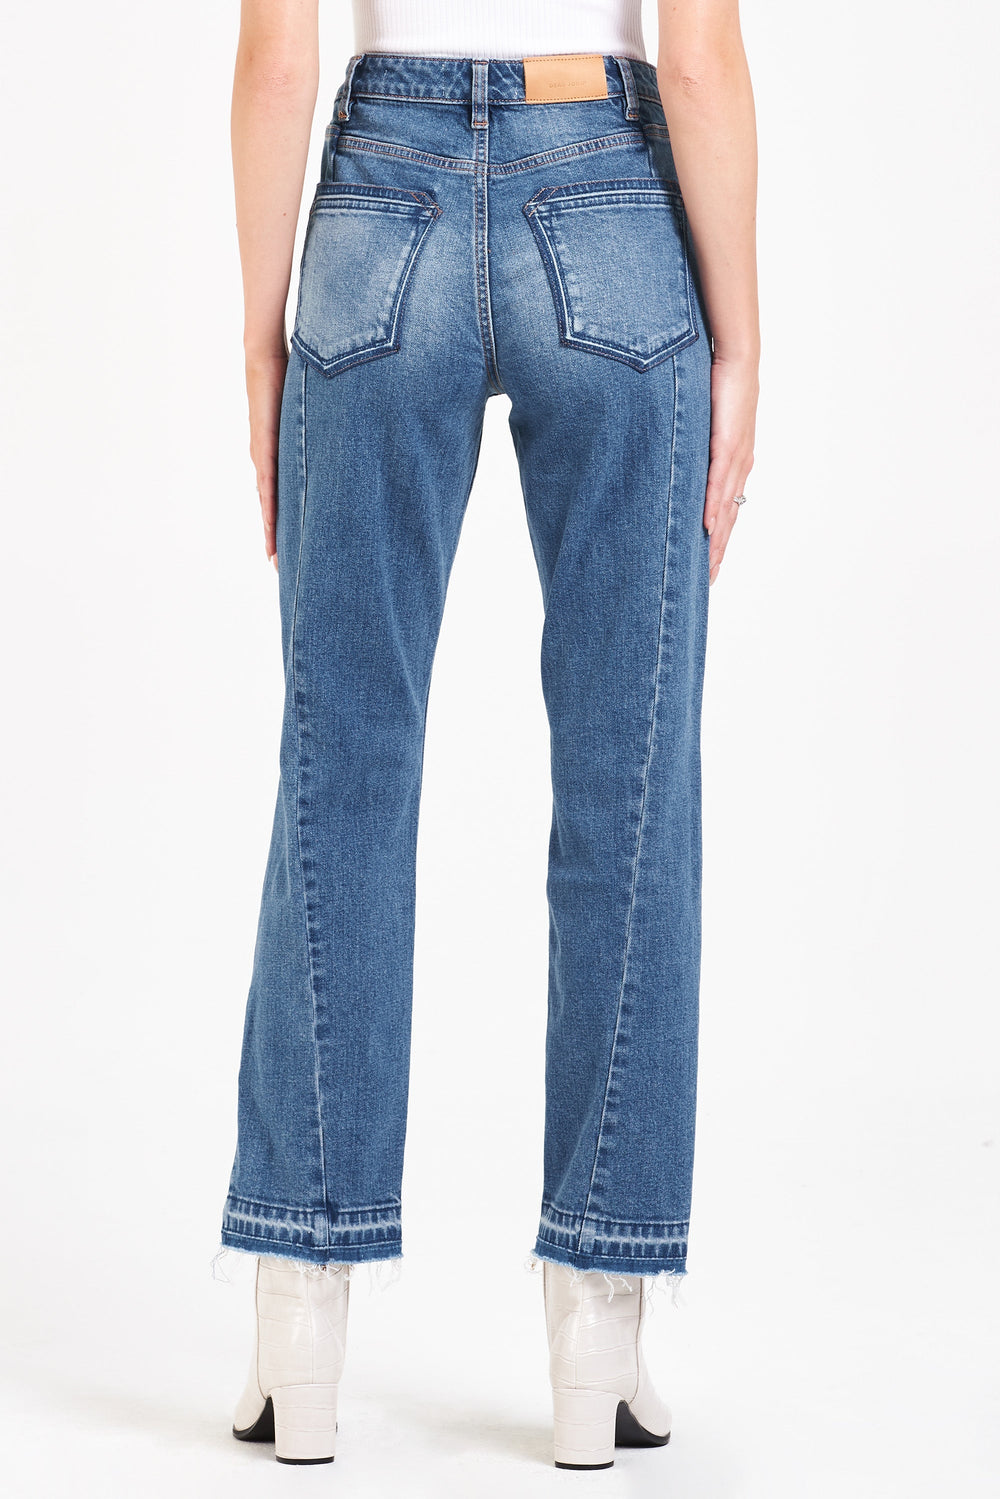 image of a female model wearing a JODI SUPER HIGH RISE STRAIGHT LEG JEANS SPEECHLESS JEANS